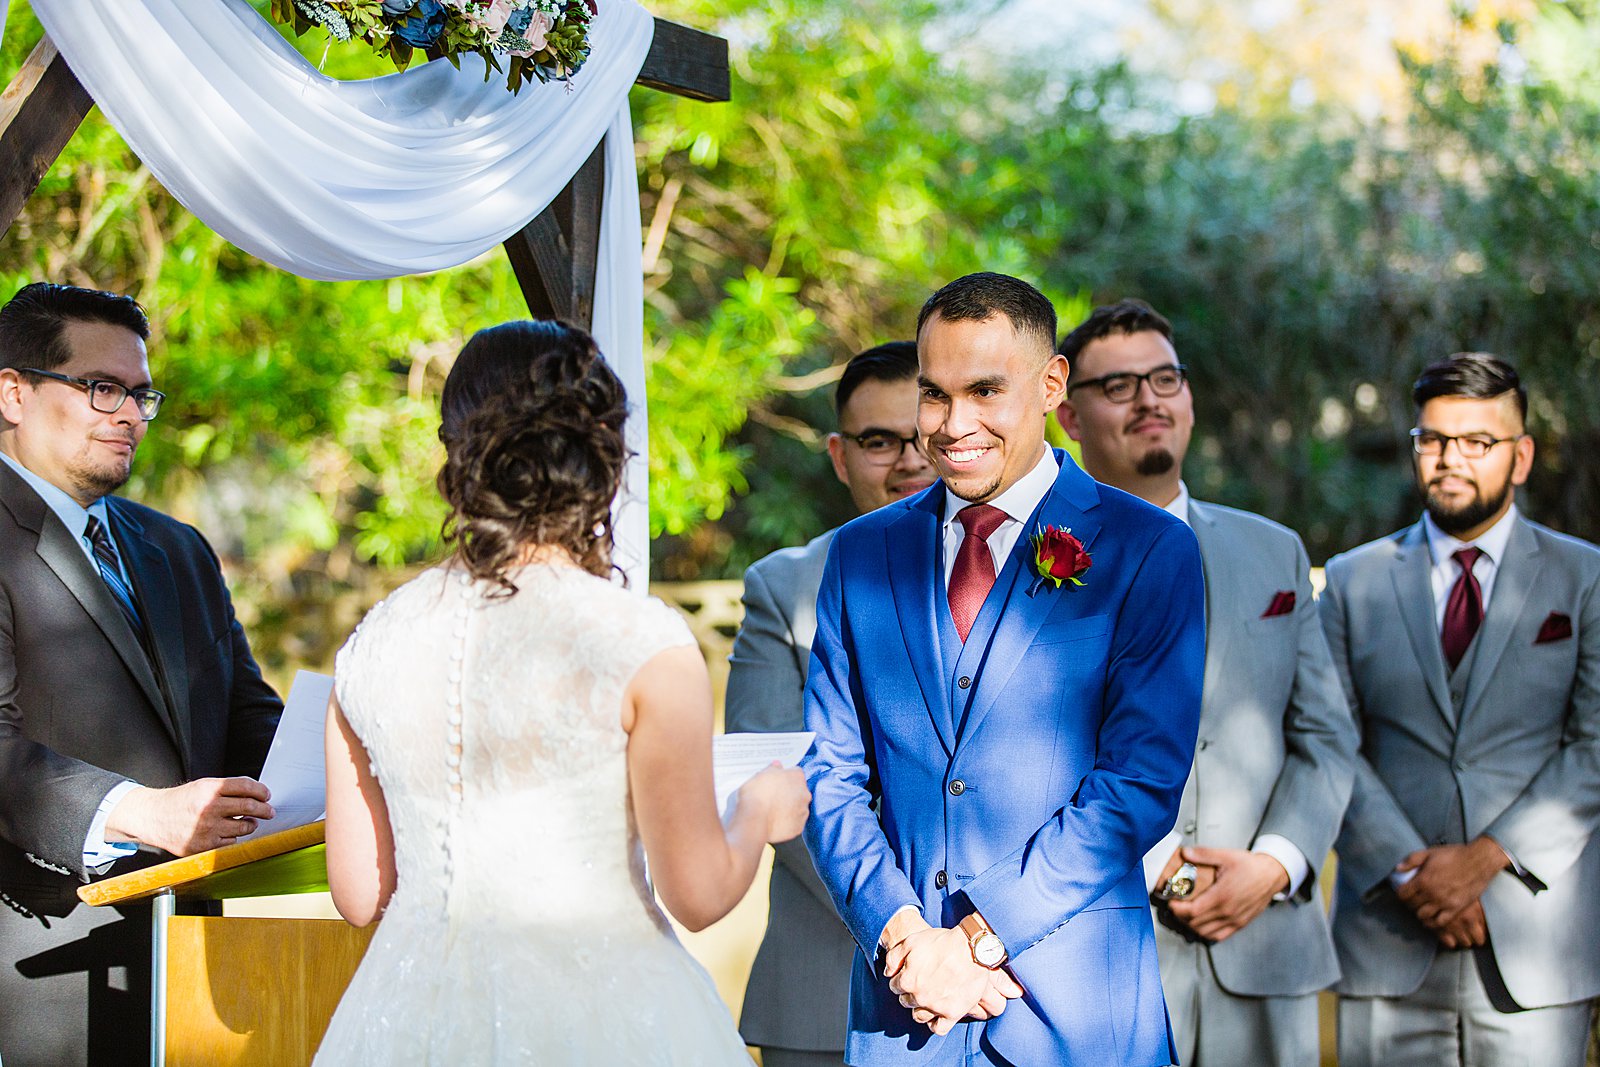 Groom looking at his bride during their wedding ceremony at Valley Garden Center by Phoenix wedding photographer PMA Photography.